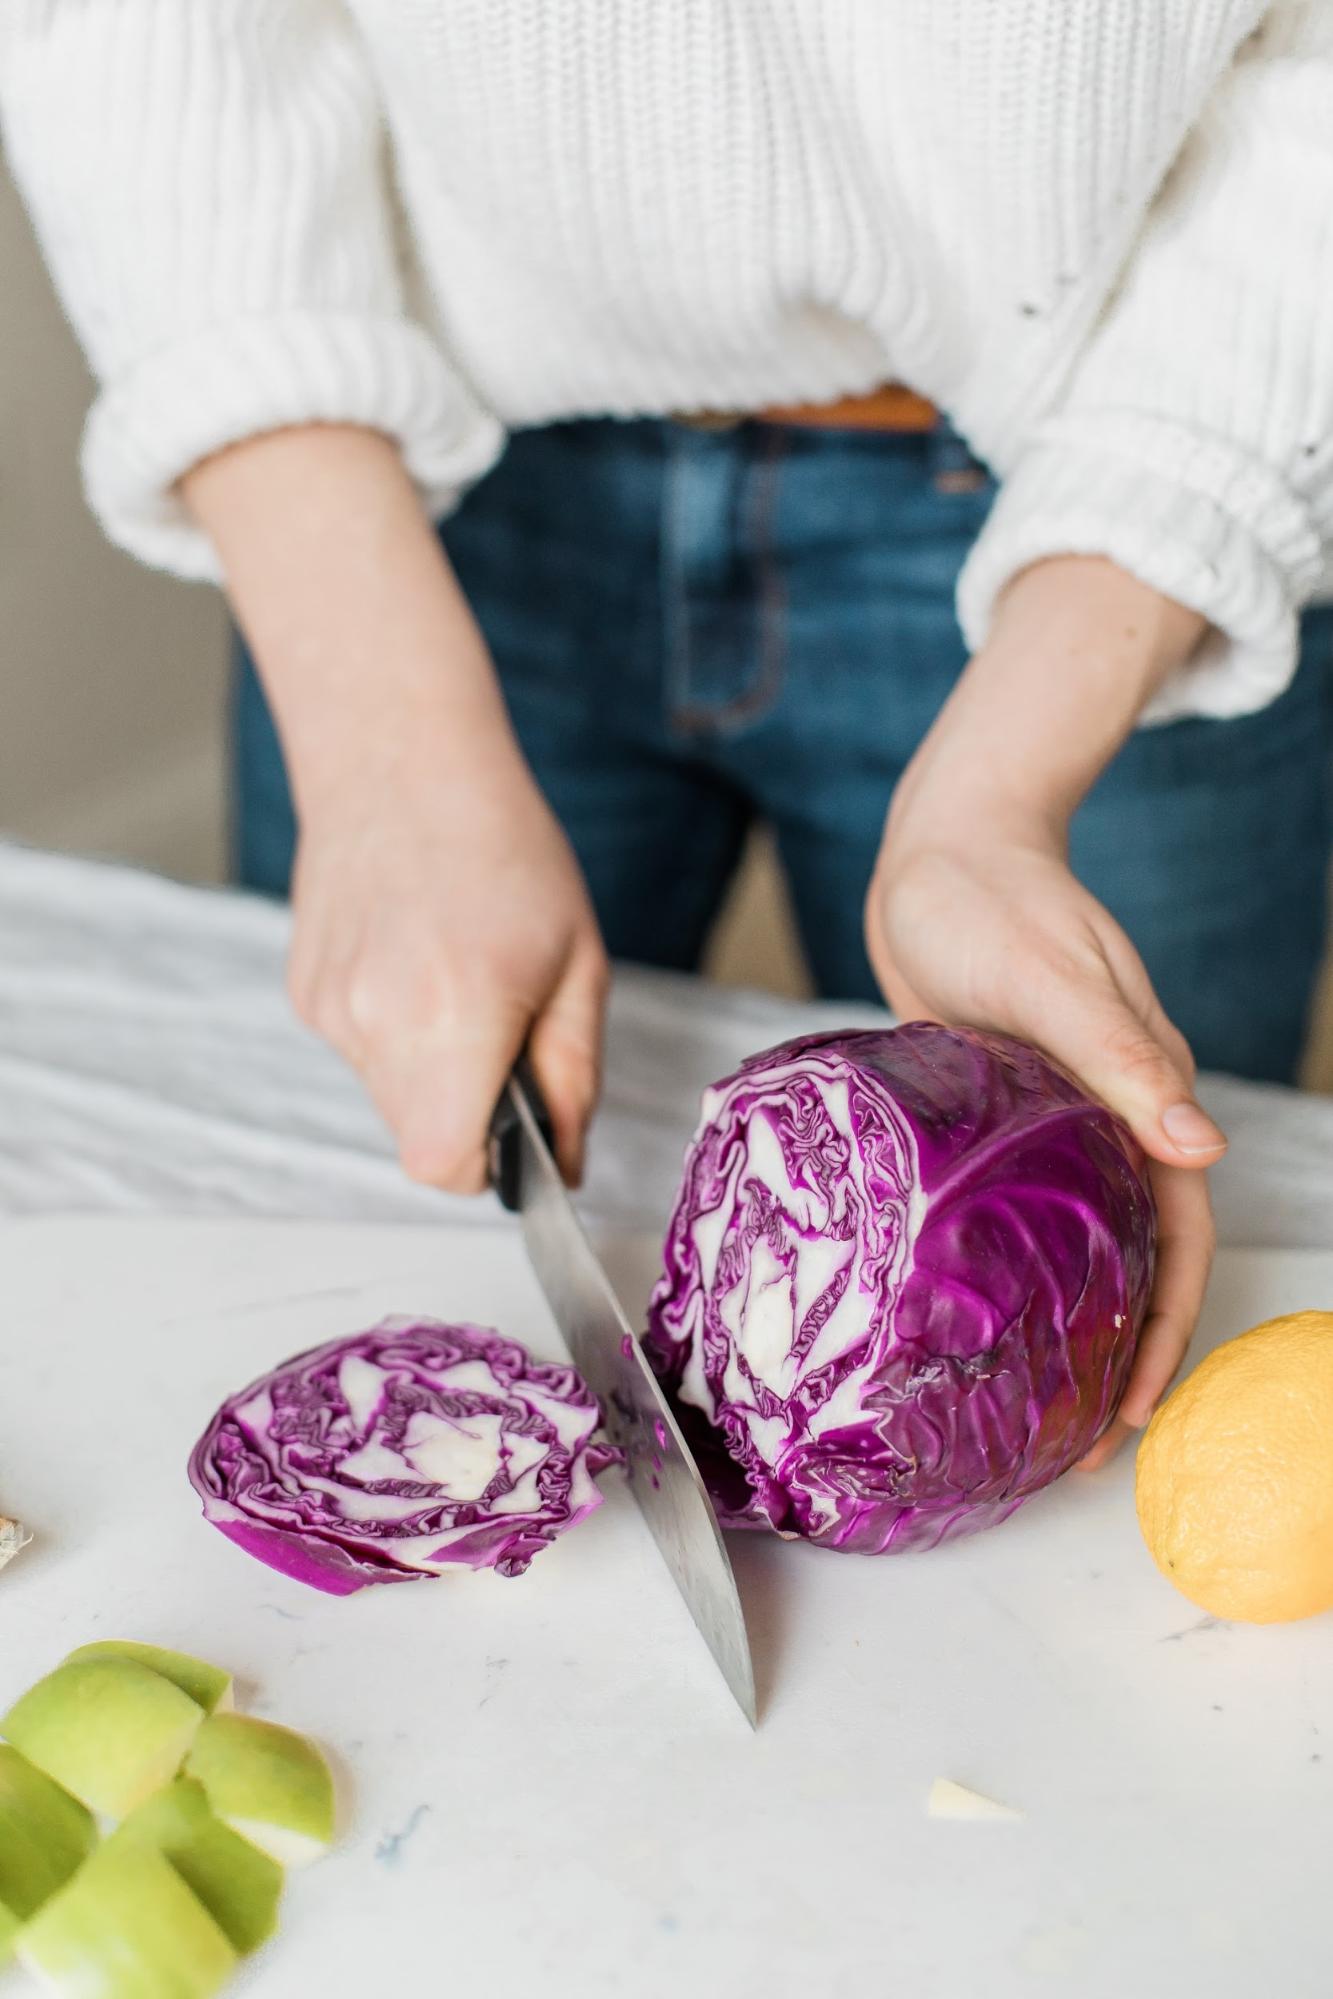 The image shows hands slice a large purple cabbage on a cutting board.